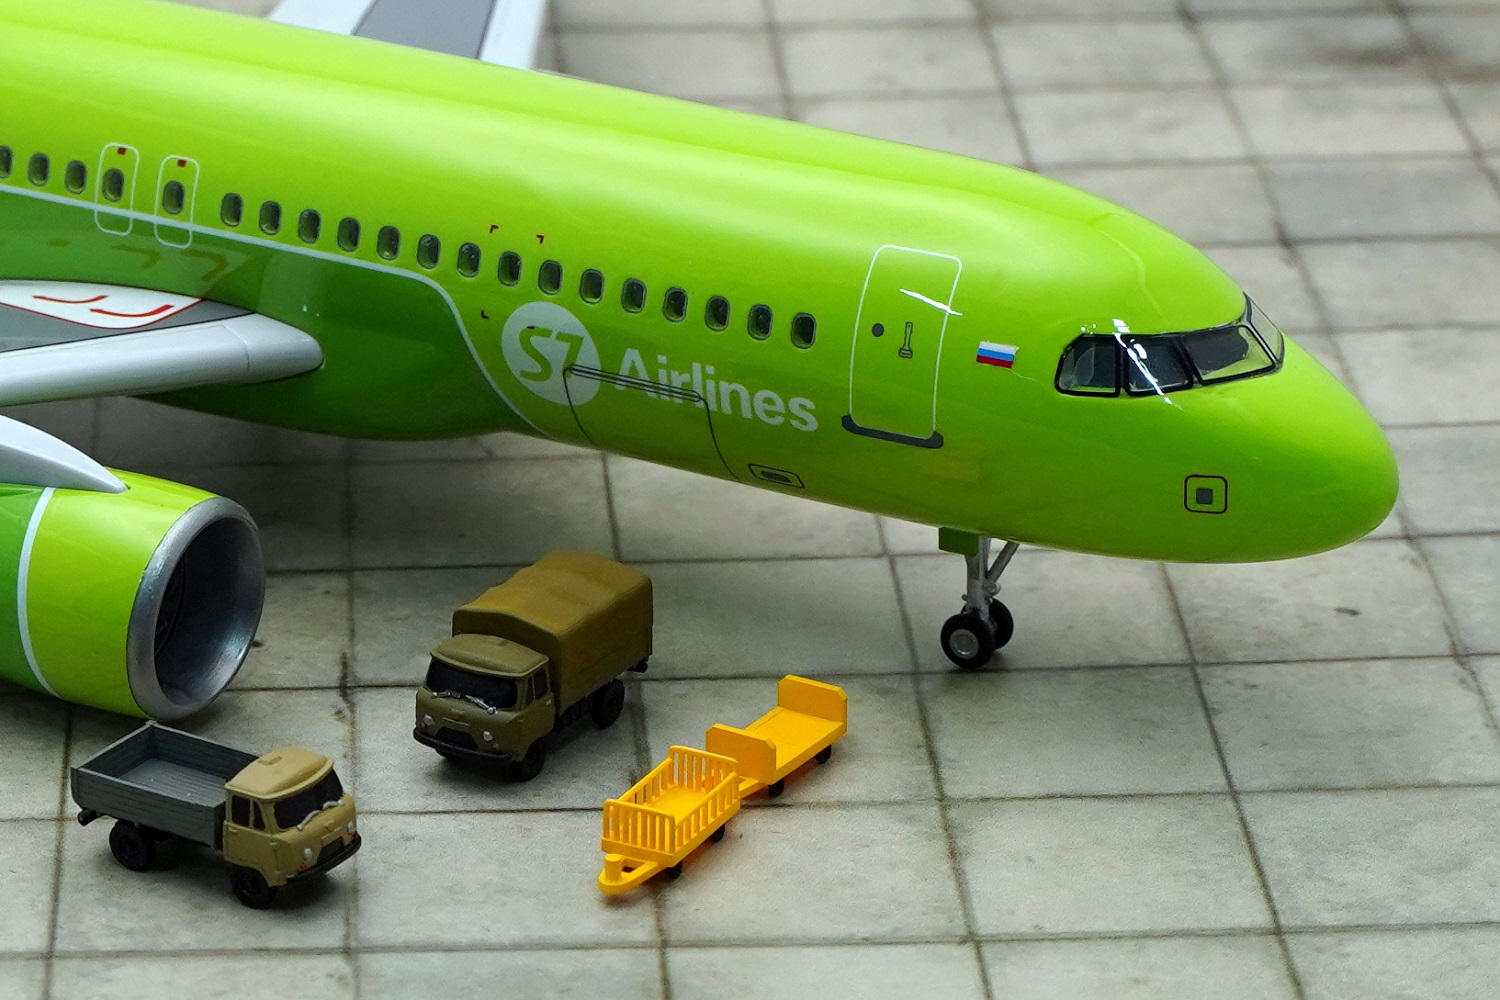   Airbus A320 Neo,  S7 Airlines .    .  # 12 hobbyplus.ru